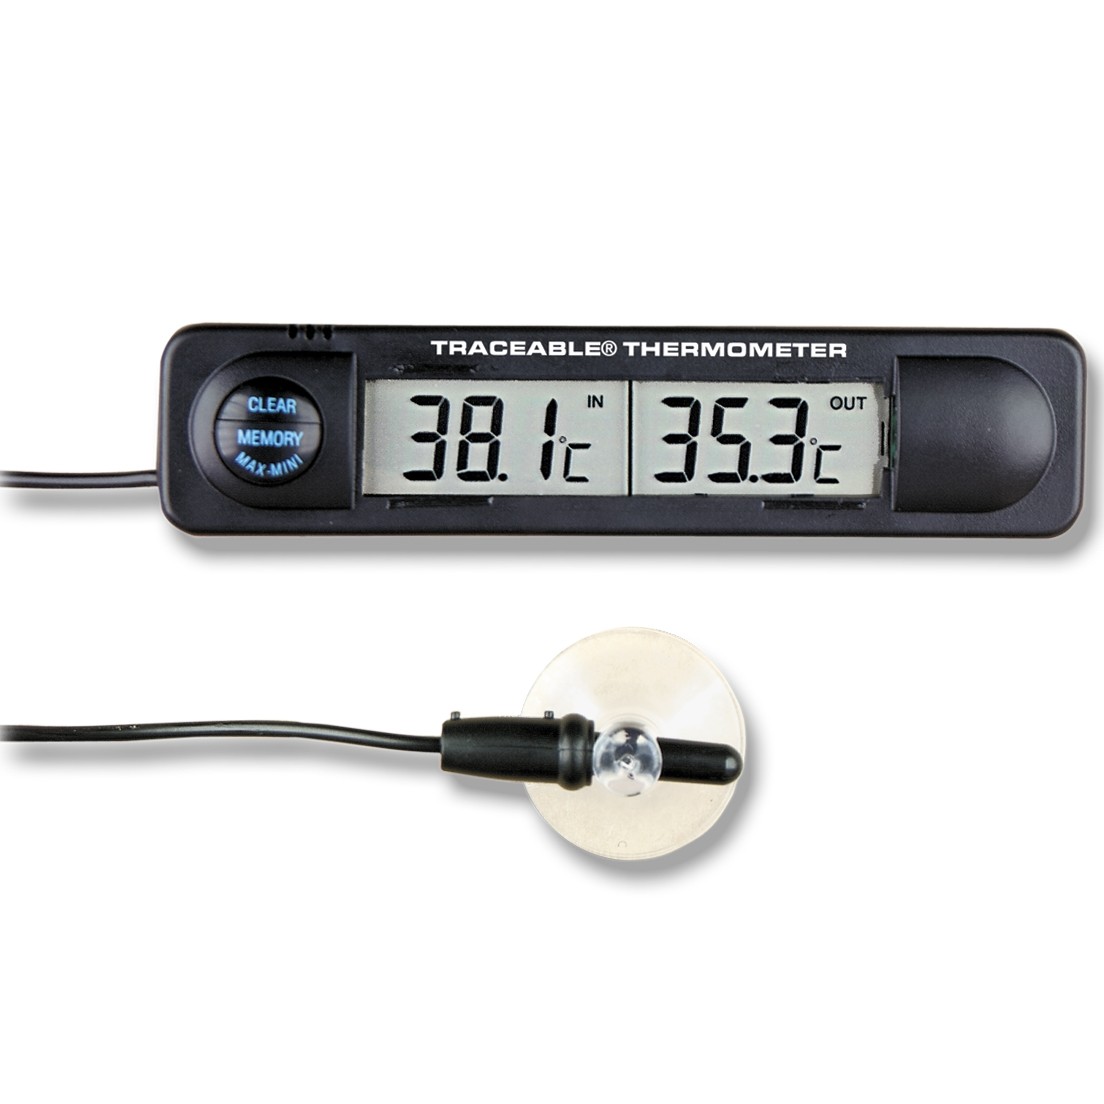 Stick Traceable Thermometer